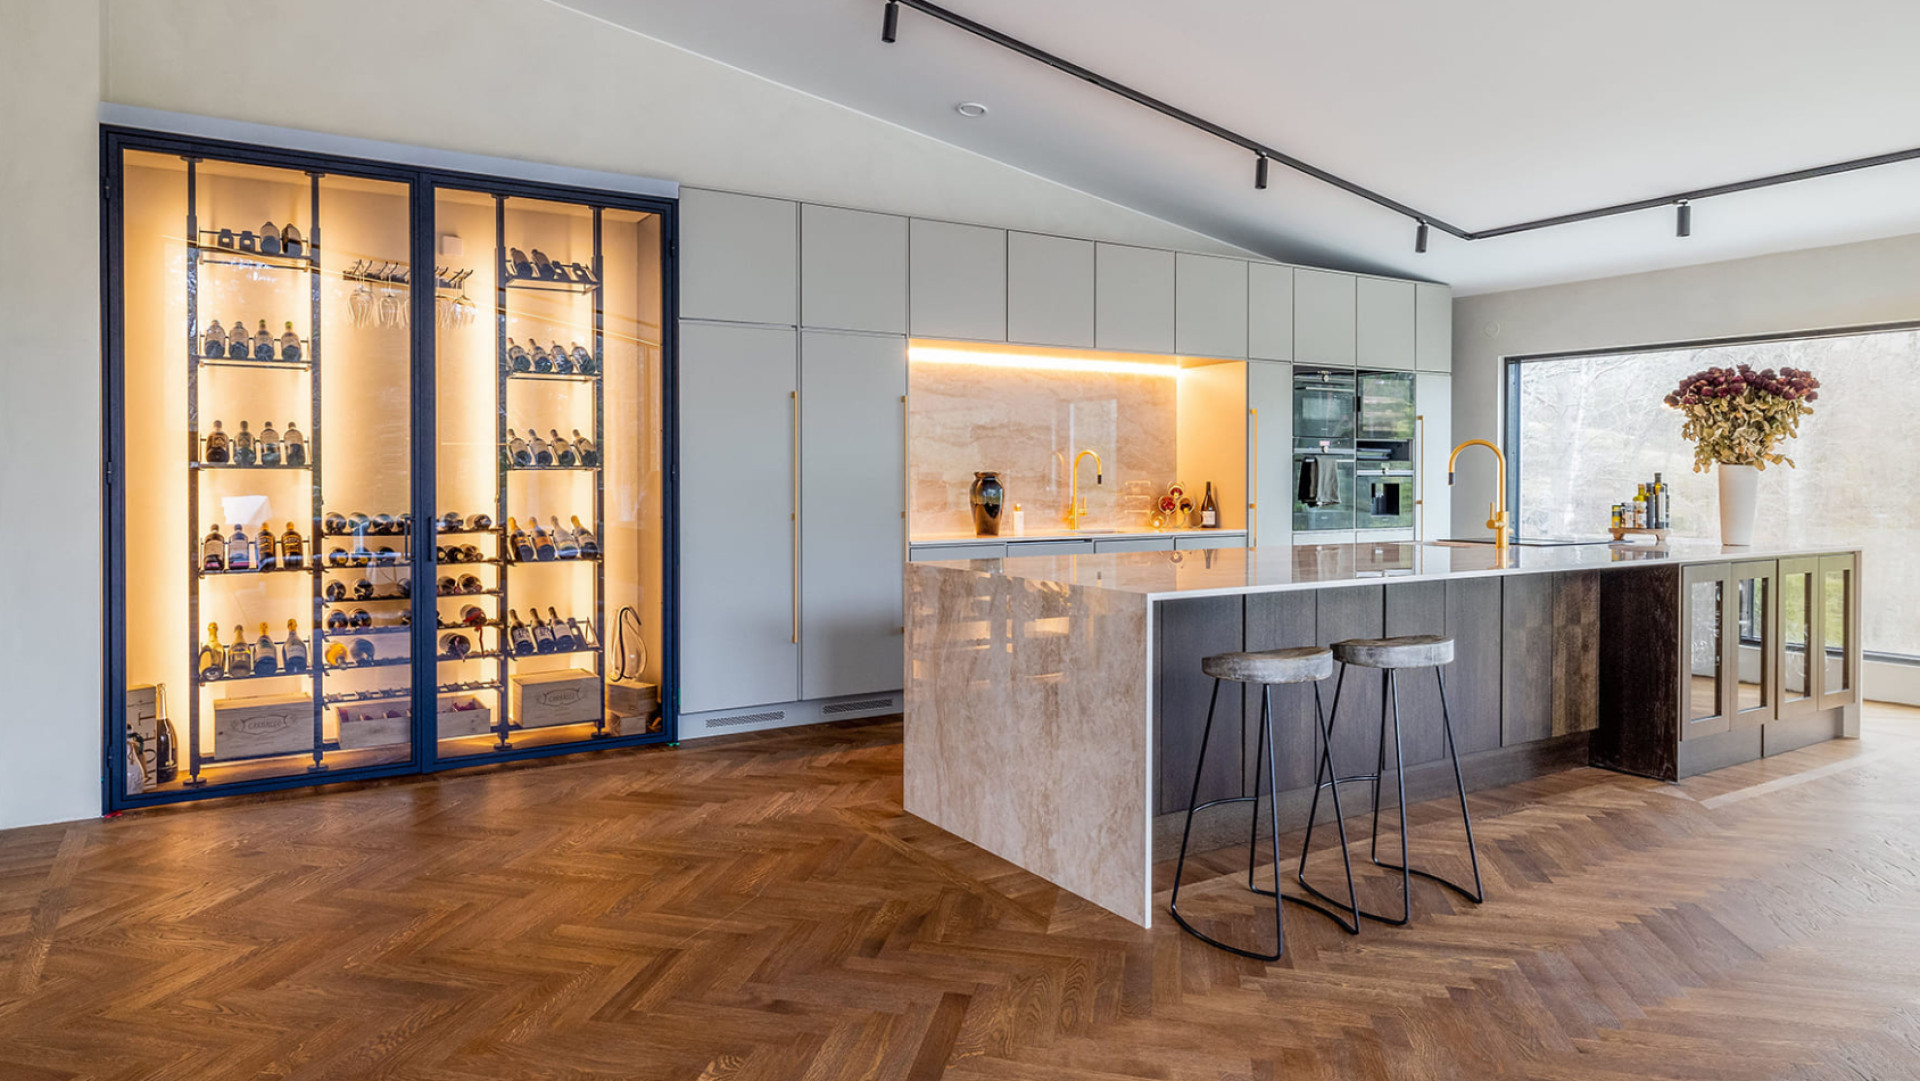 Dream wine cellars - Example of creating a wine display case built into the wall of a contemporary and luxurious interior with a marble kitchen island.